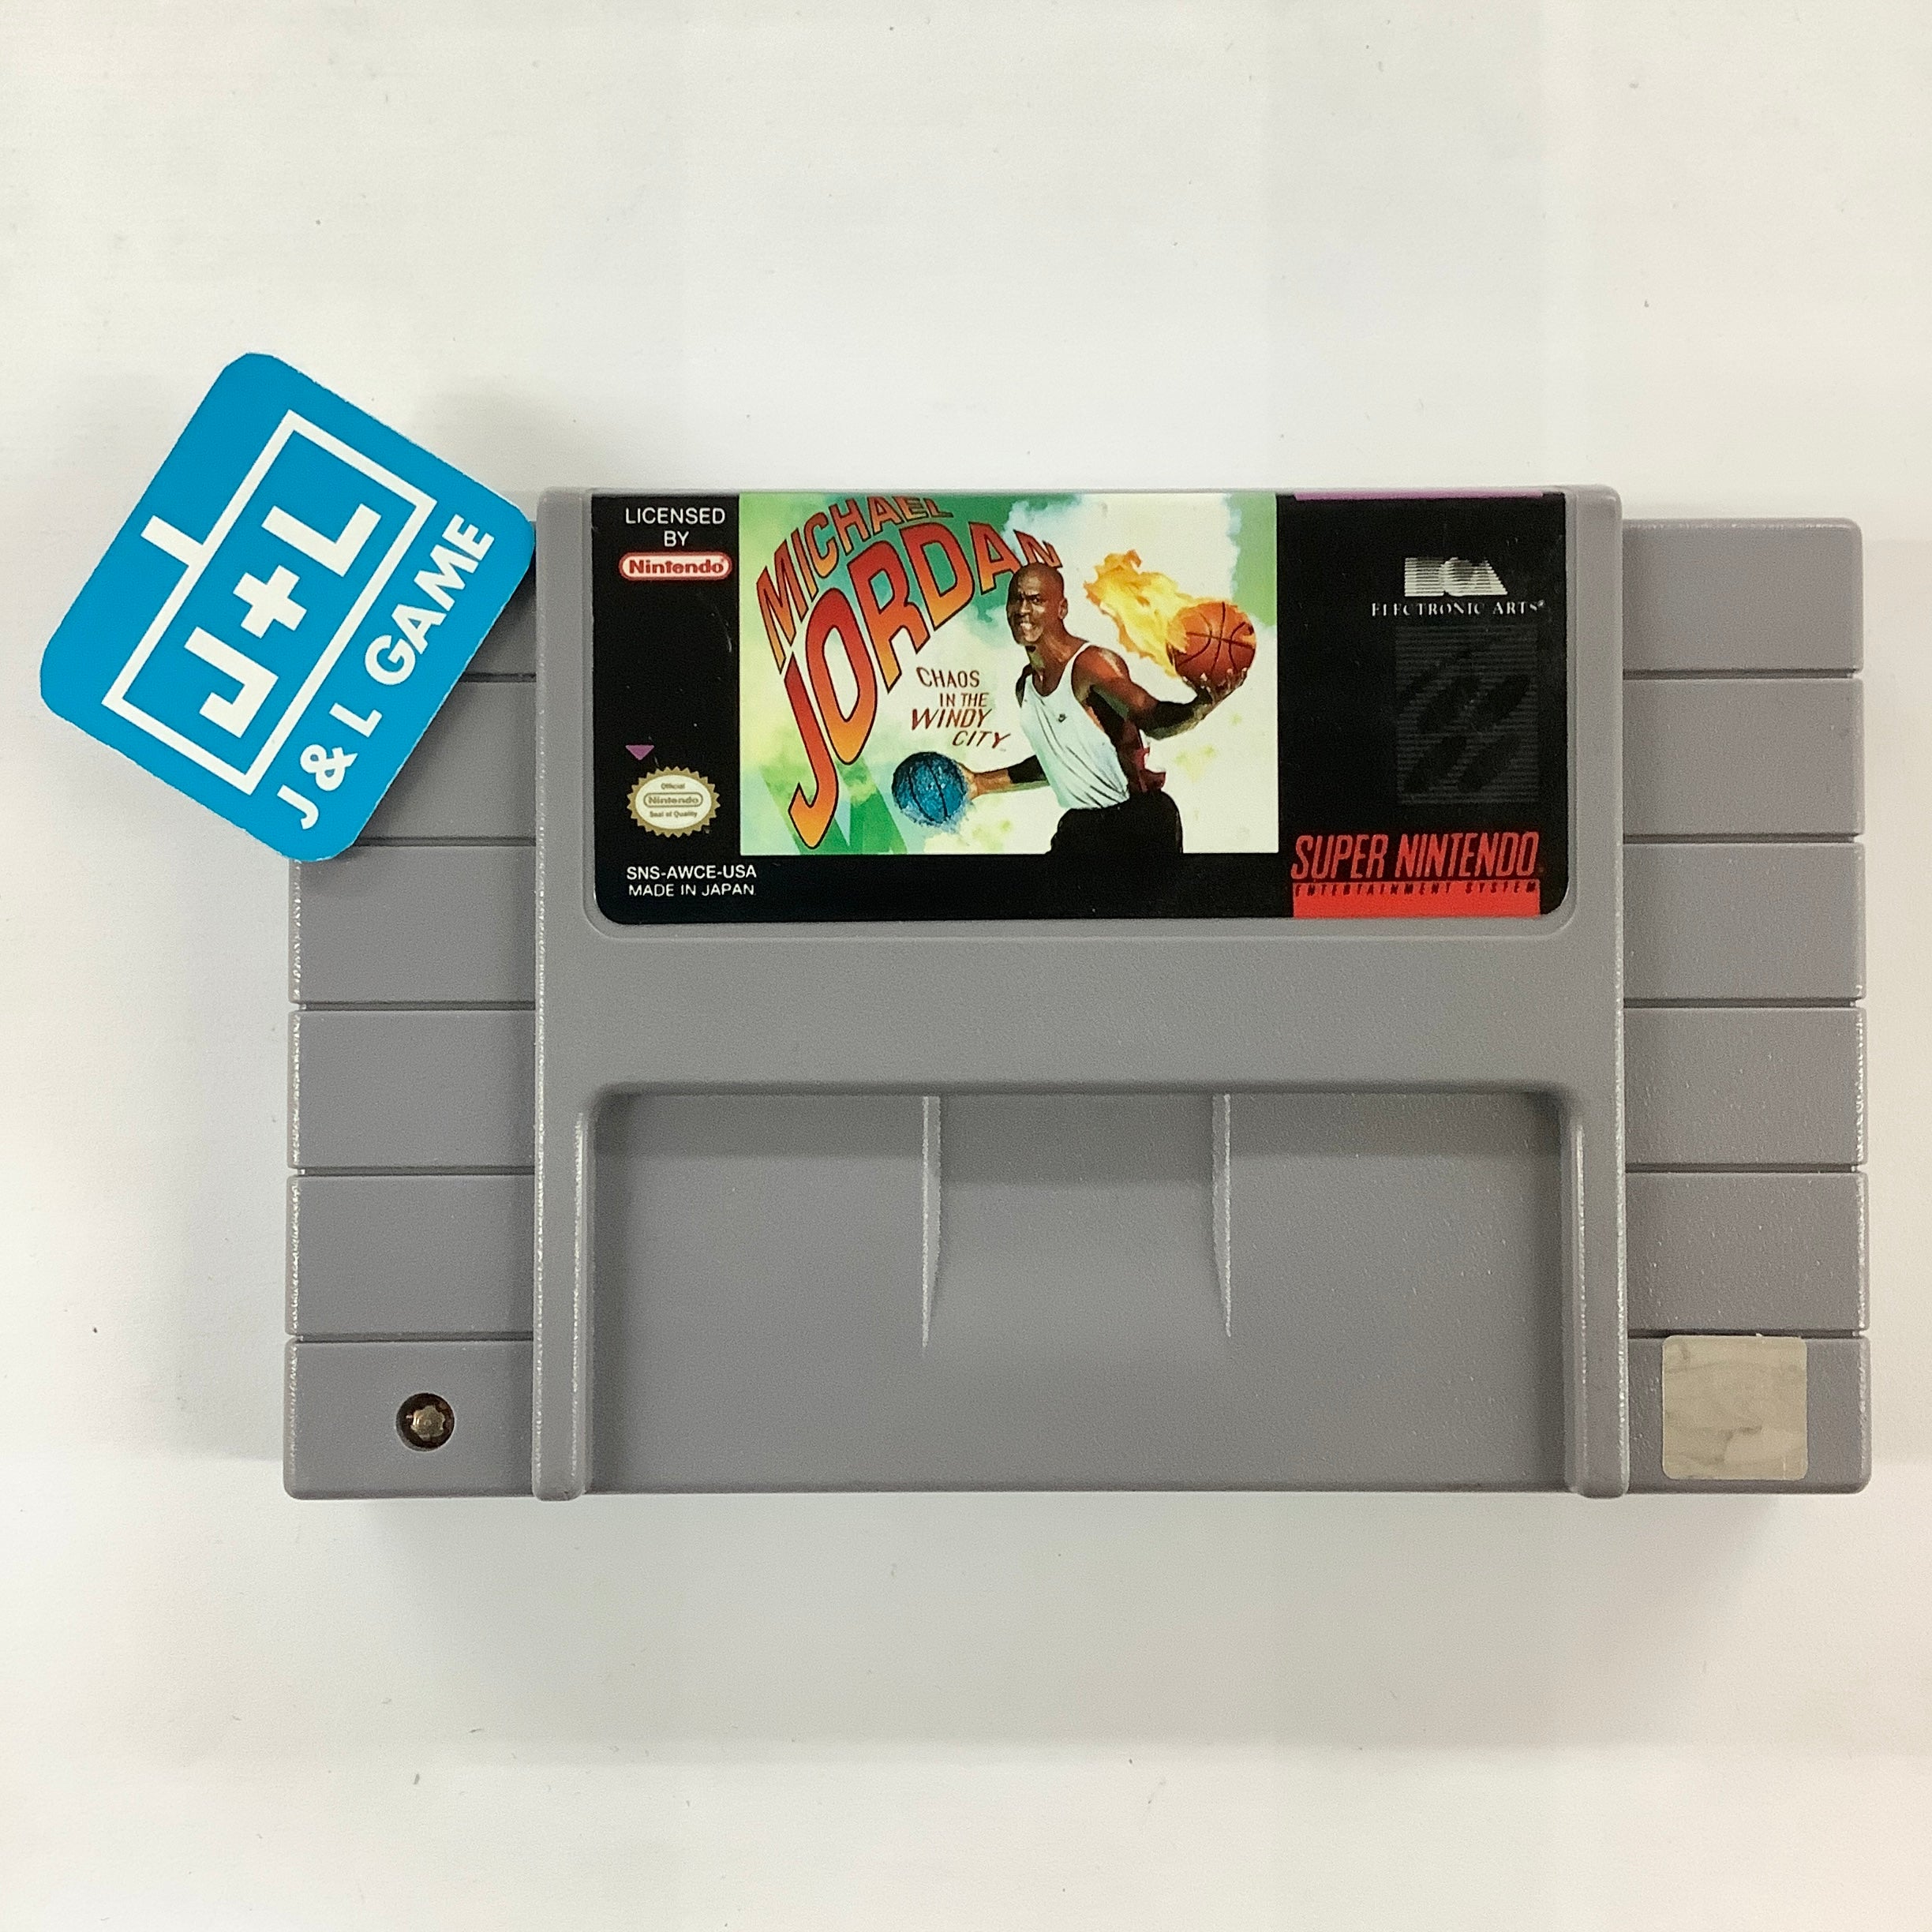 Michael Jordan: Chaos in the Windy City - (SNES) Super Nintendo [Pre-Owned] Video Games Electronic Arts   